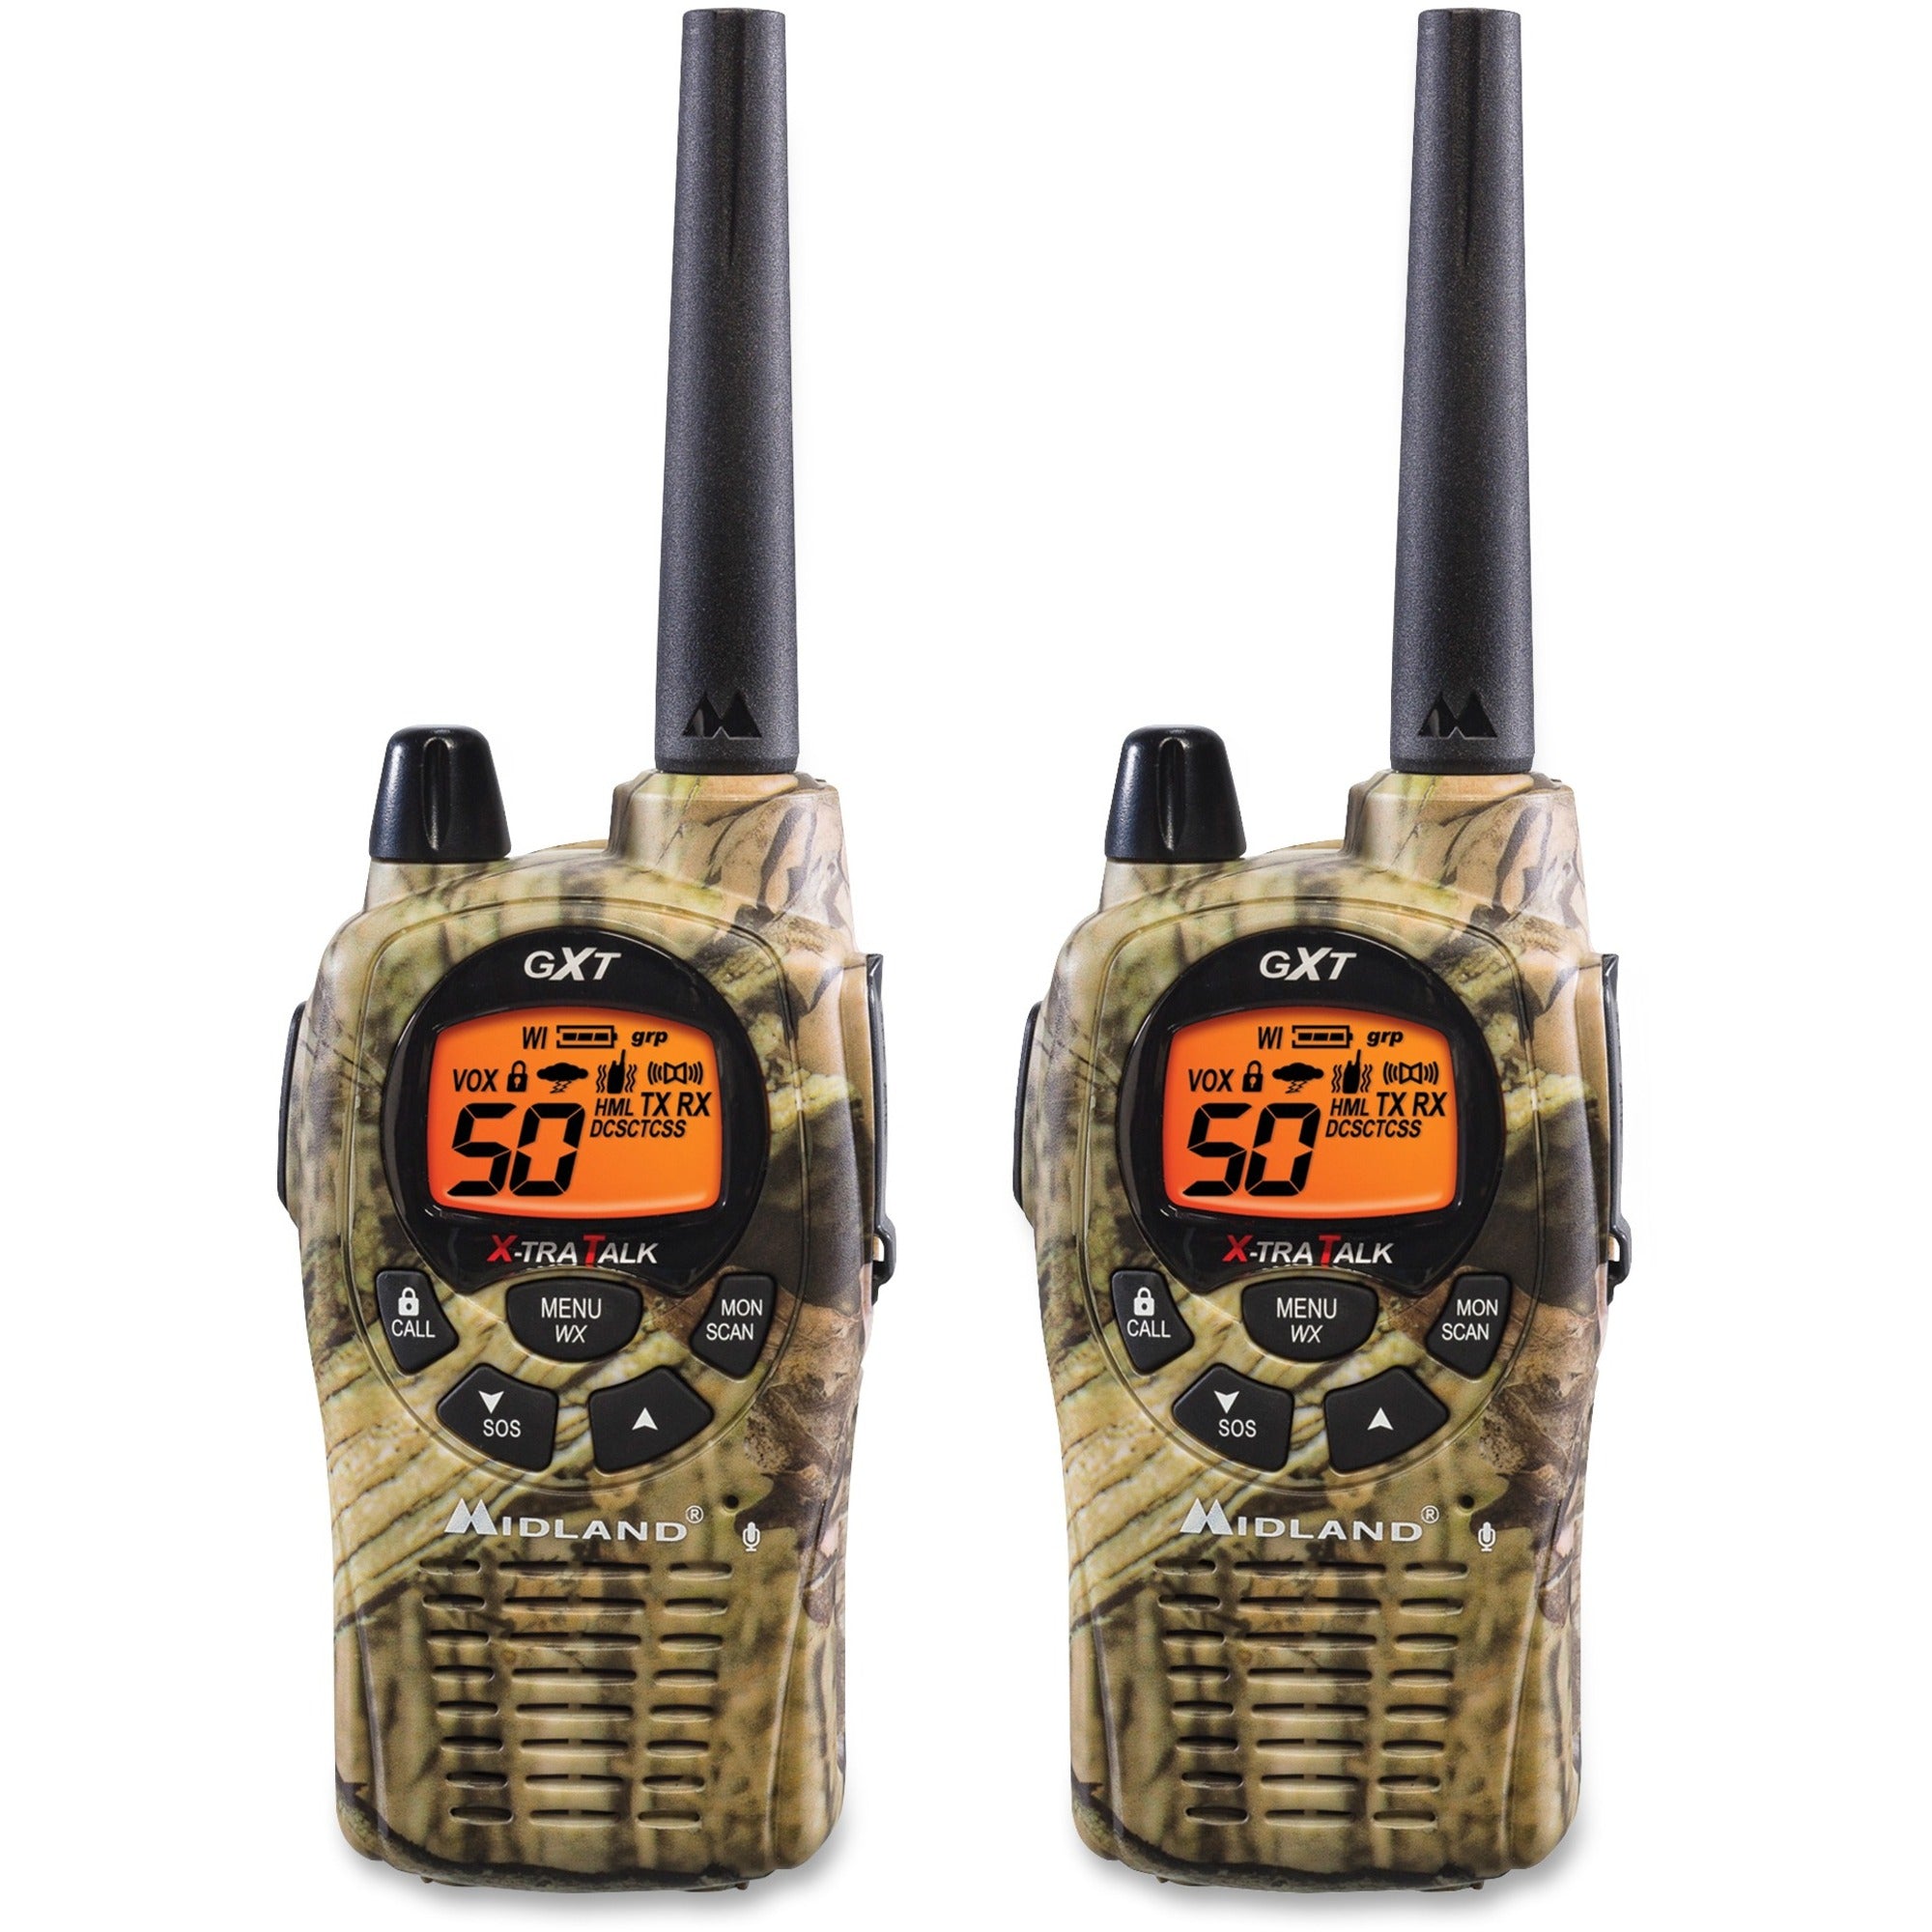 Midland GXT1050VP4 2-Way Pair - 50 Radio Channels - Upto 190080 ft - 38 Total Privacy Codes - CTCSS - Auto Squelch, Keypad Lock, Silent Operation - Water Proof - AA - 2 Each - 